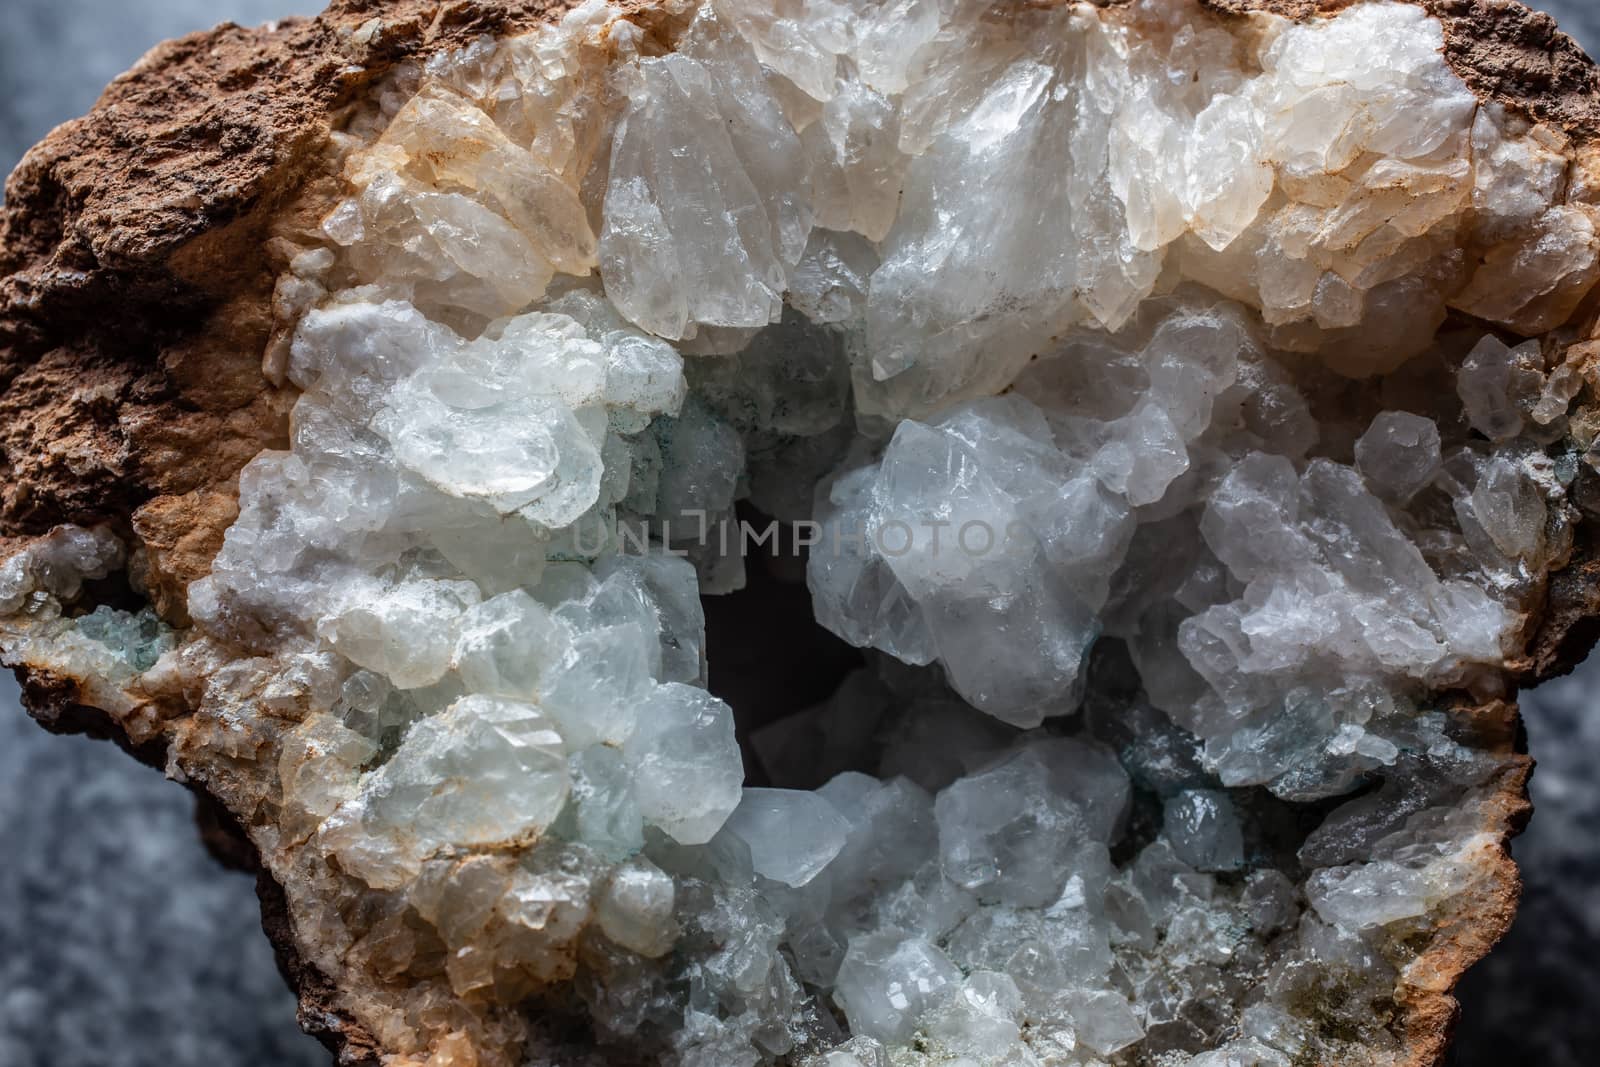 transparent shiny rock crystals in a geode